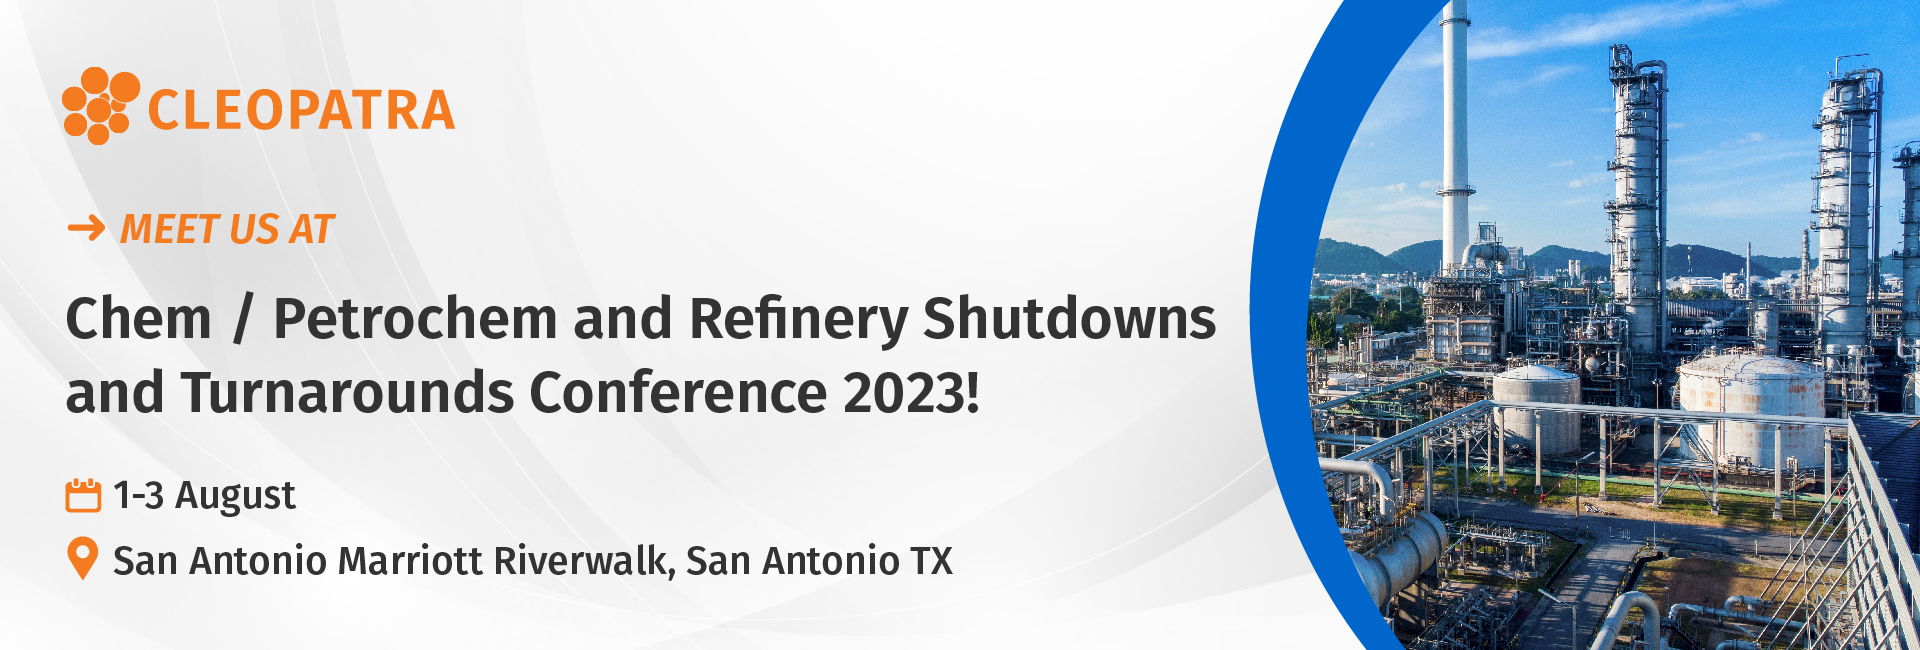 Chem / Petrochem and Refinery Shutdowns and Turnarounds Conference (banner)